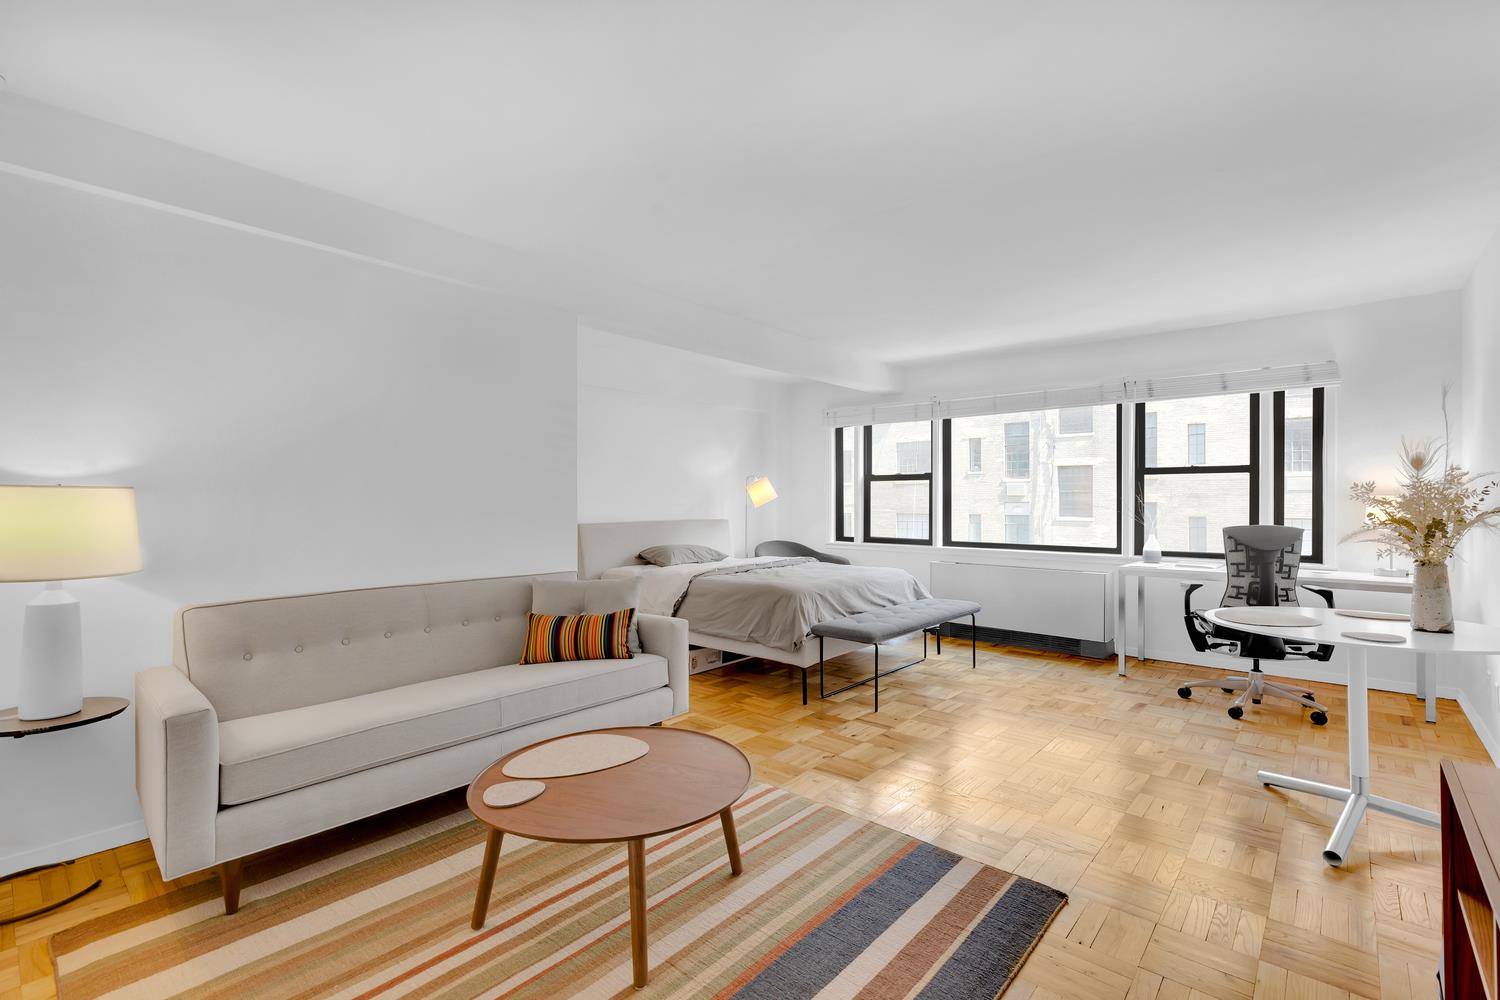 Spacious and quiet alcove studio in doorman building just off the Gold Coast in Greenwich Village.